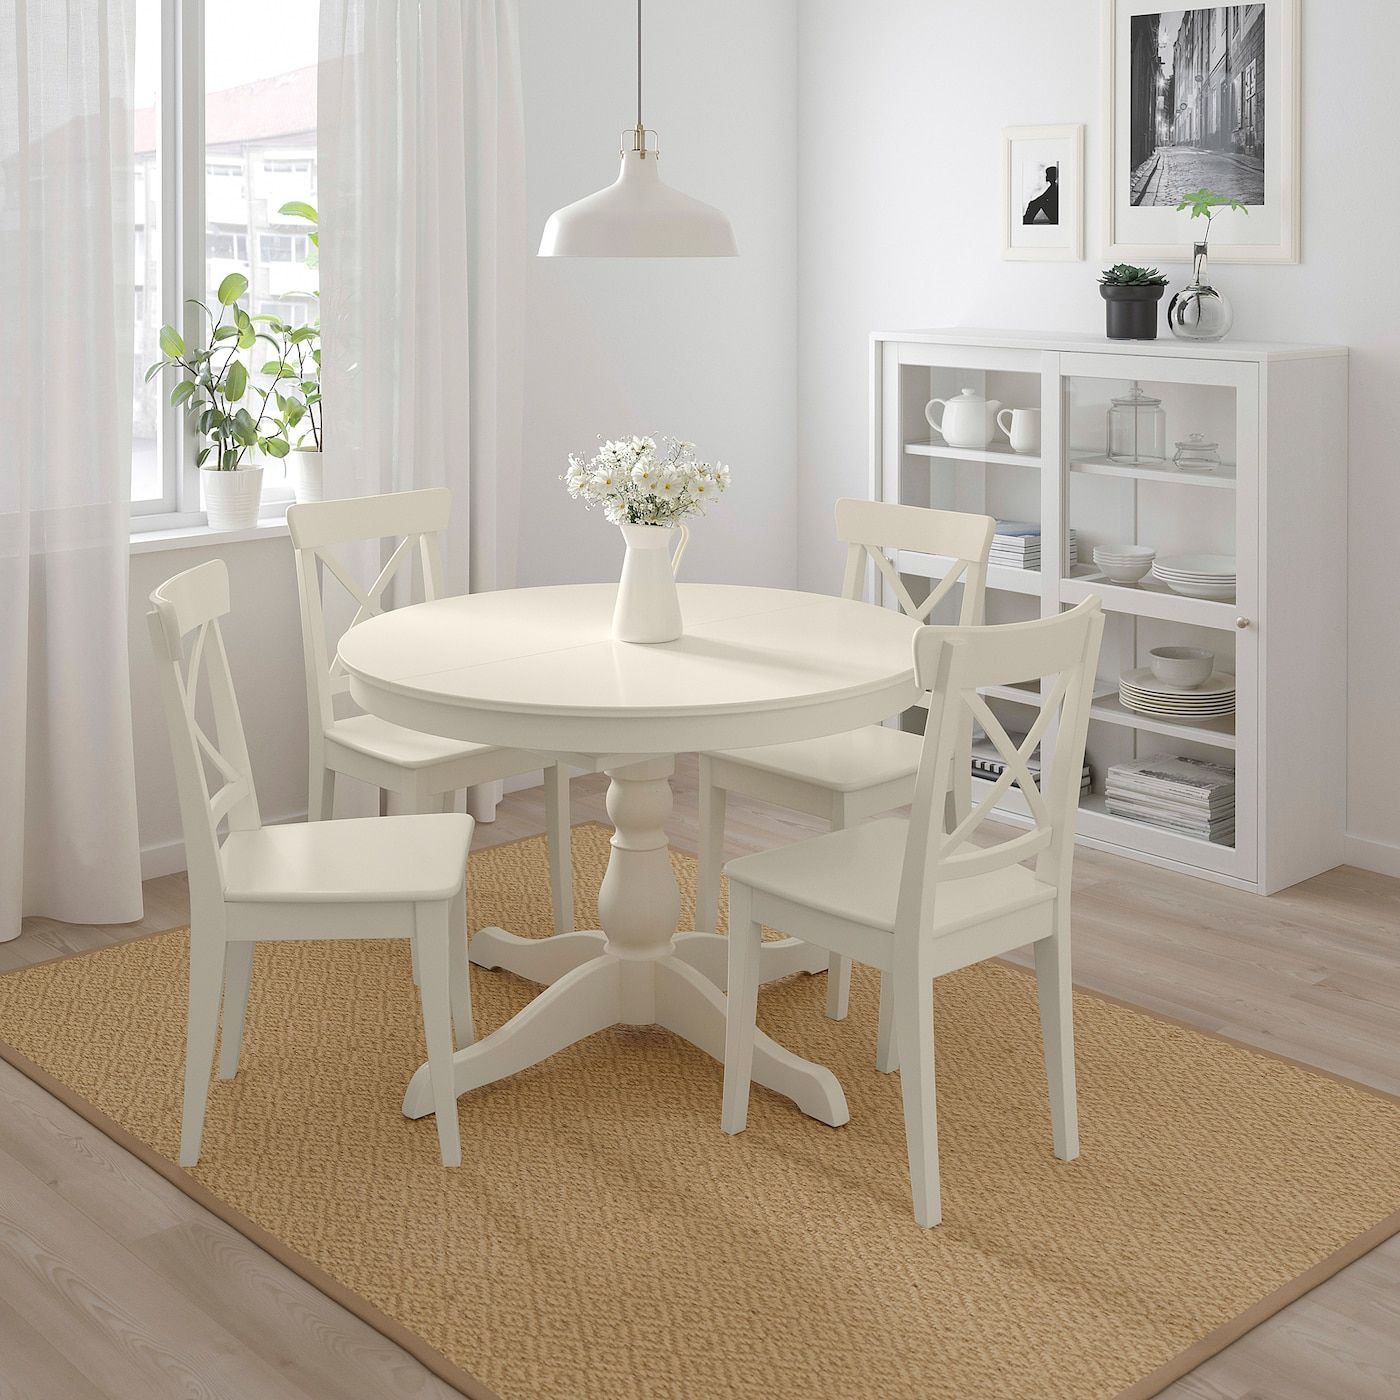 Elegant White Dining Table and Chairs: A Timeless Combination